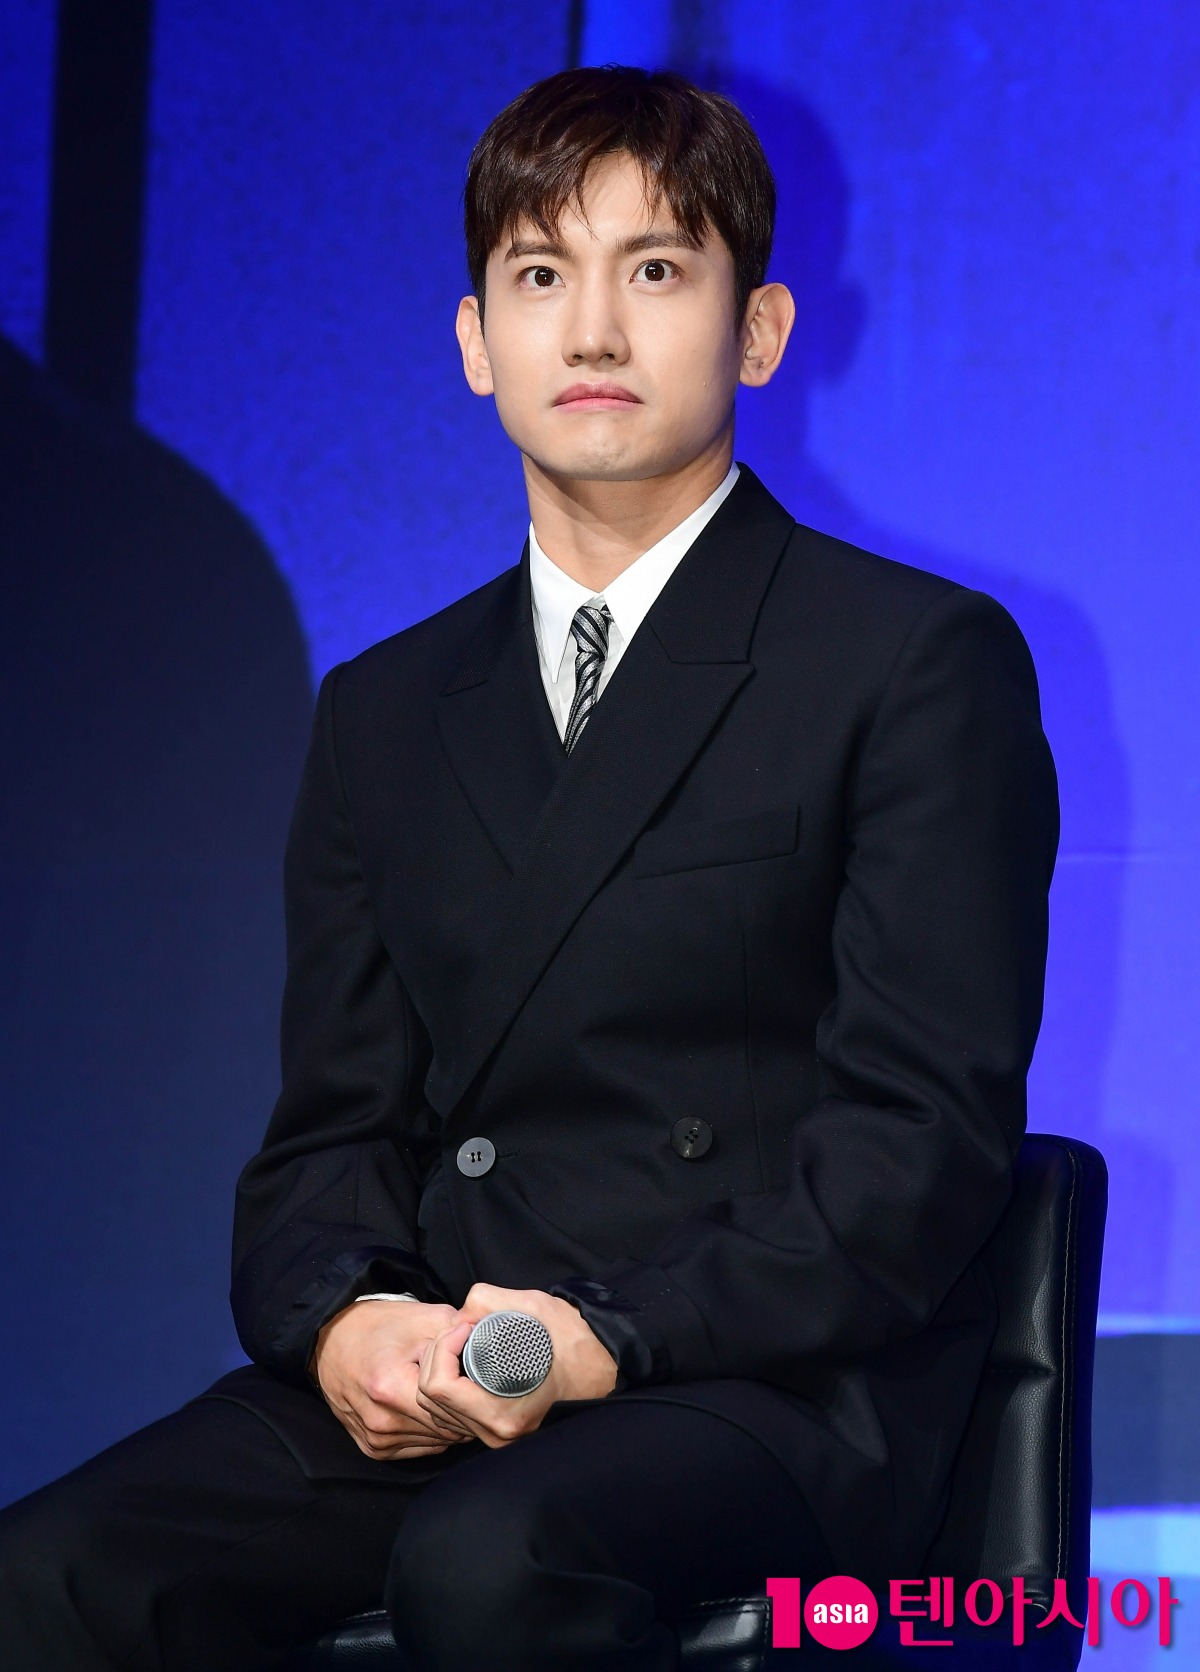 TVXQ's Max Changmin "20th Anniversary of Debut, I don't feel emotional about anniversaries, but today is special."